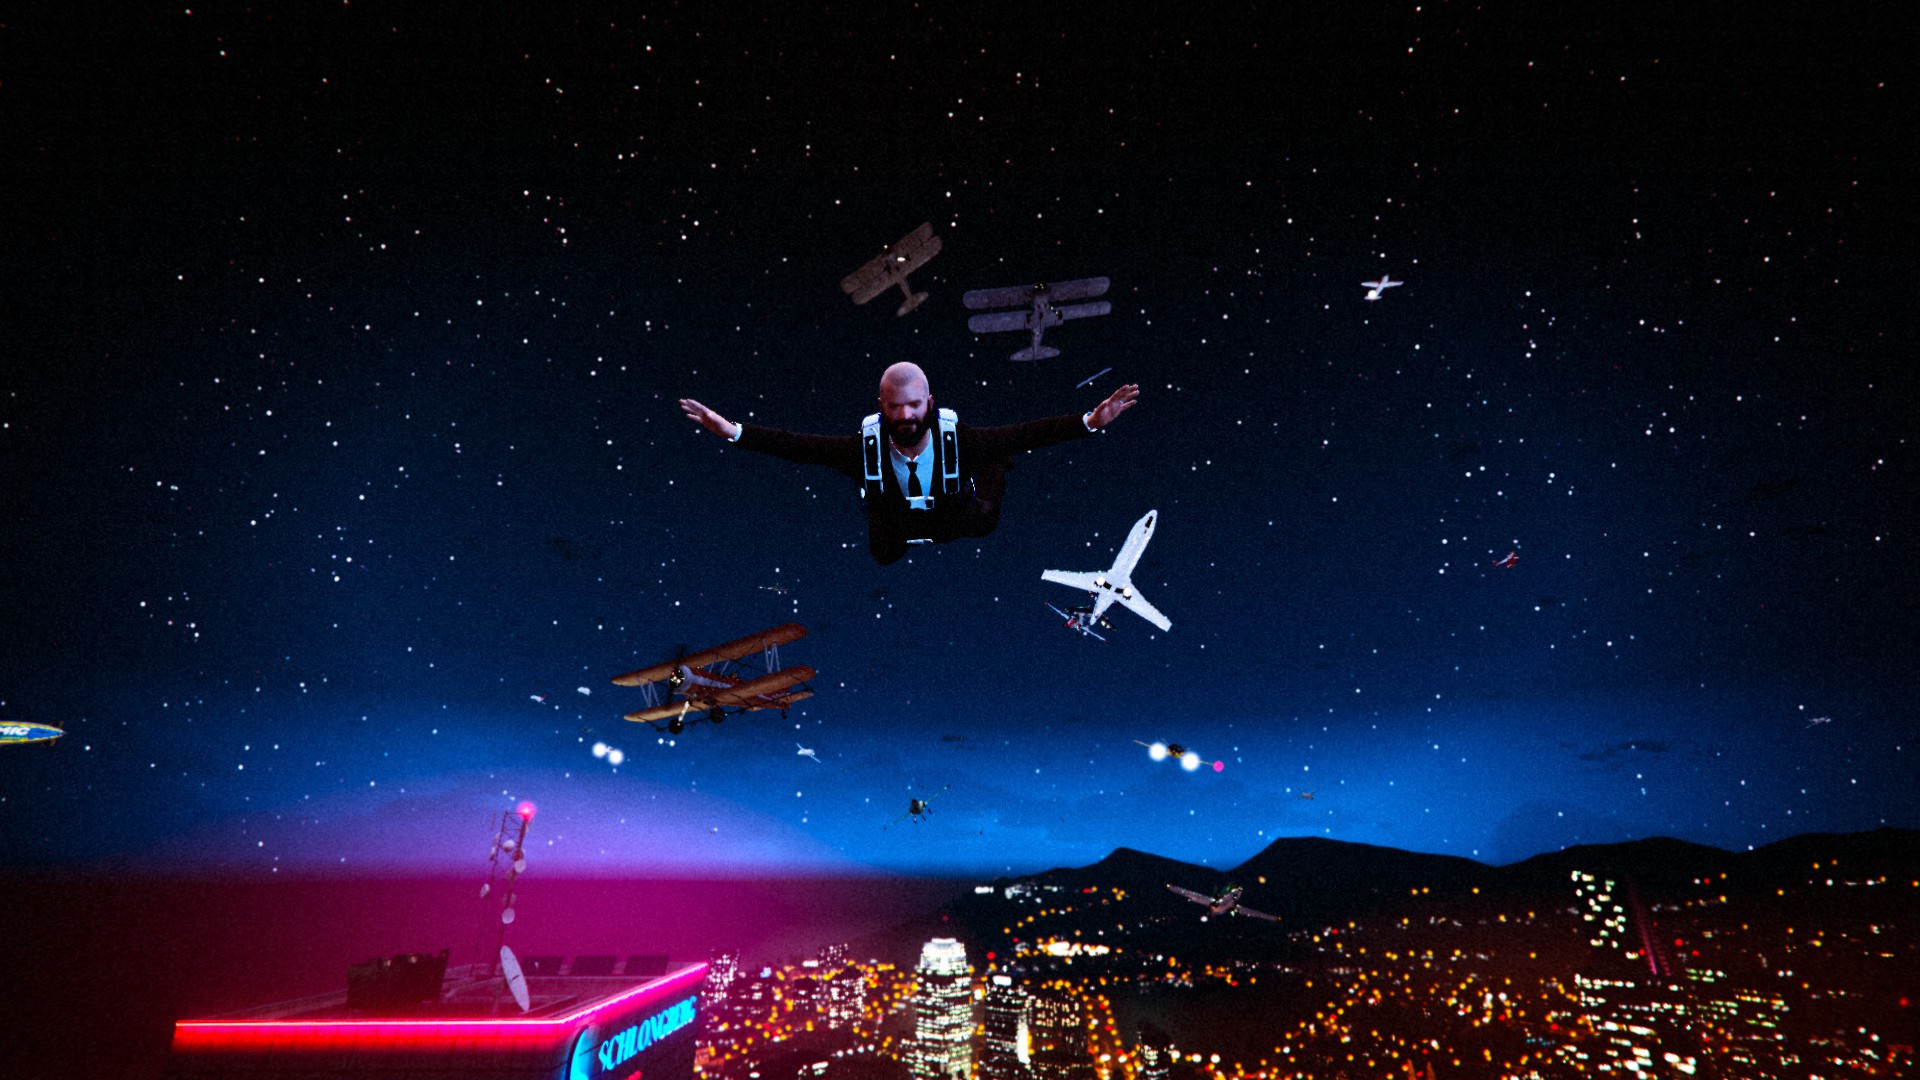 vertical wallpaper video game, grand theft auto v, skydiving, grand theft auto